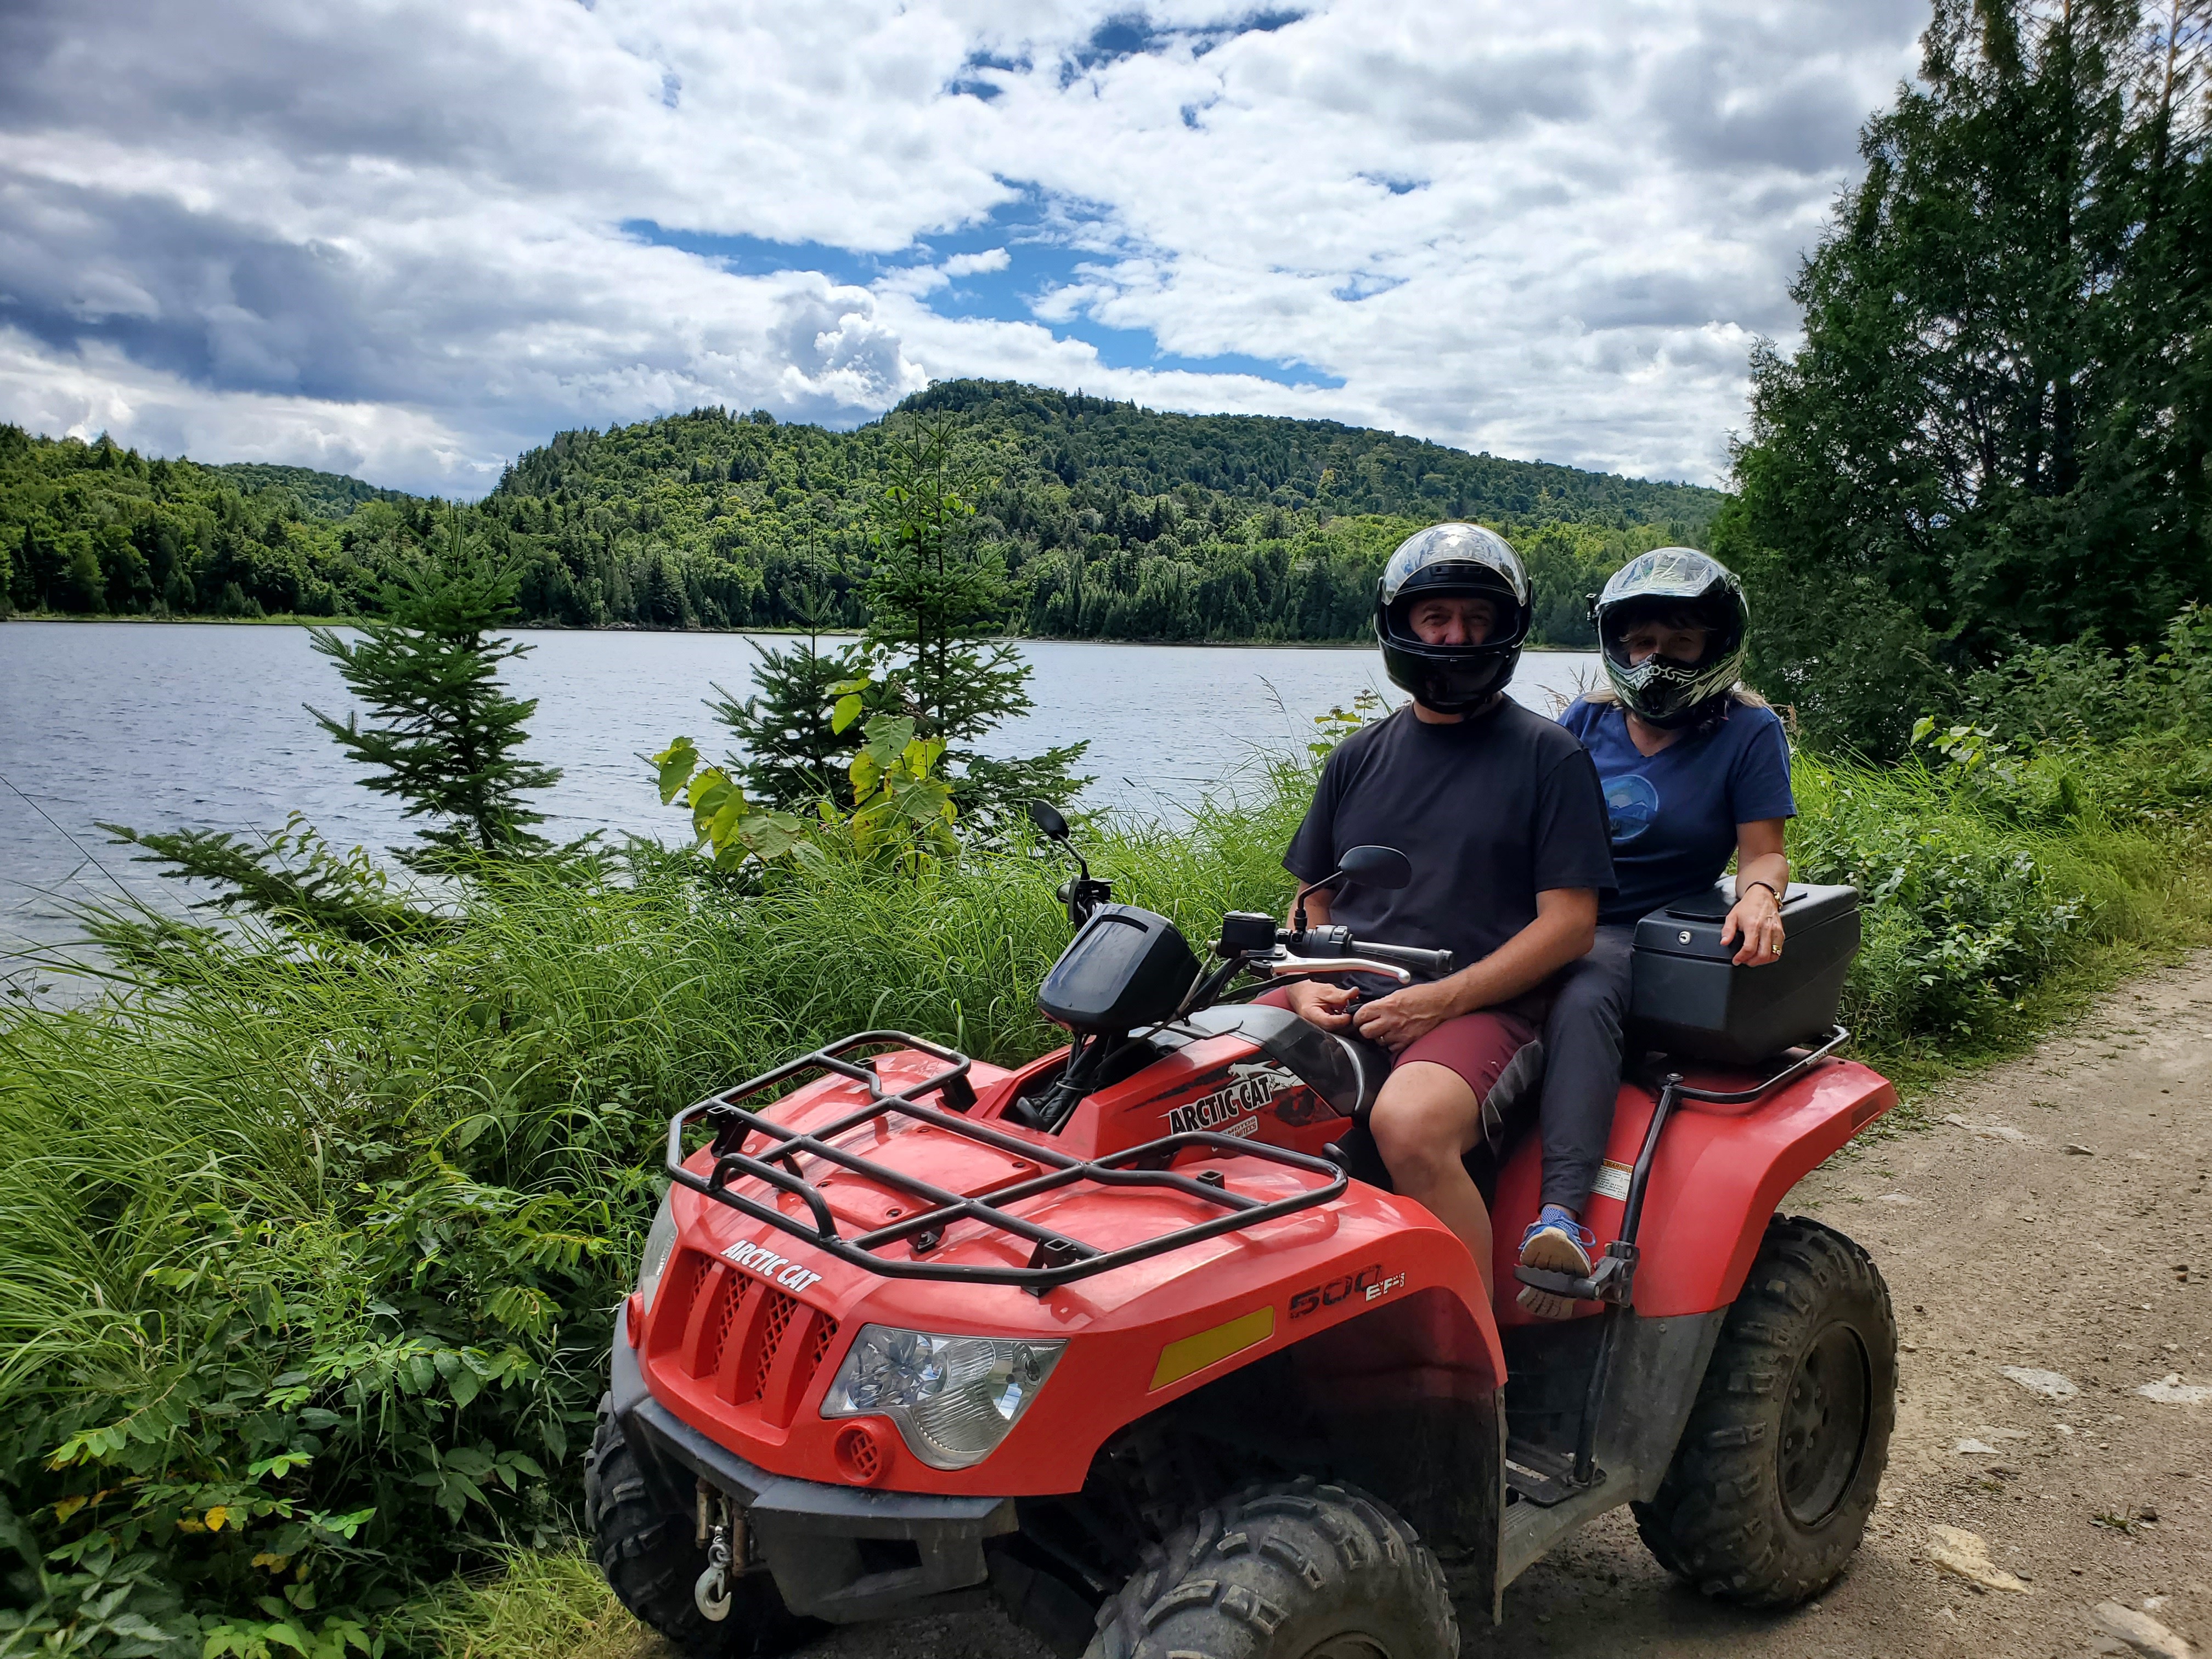 two people wearing helmets and sittting on a red ATV, in front of lush green forest and a lake.